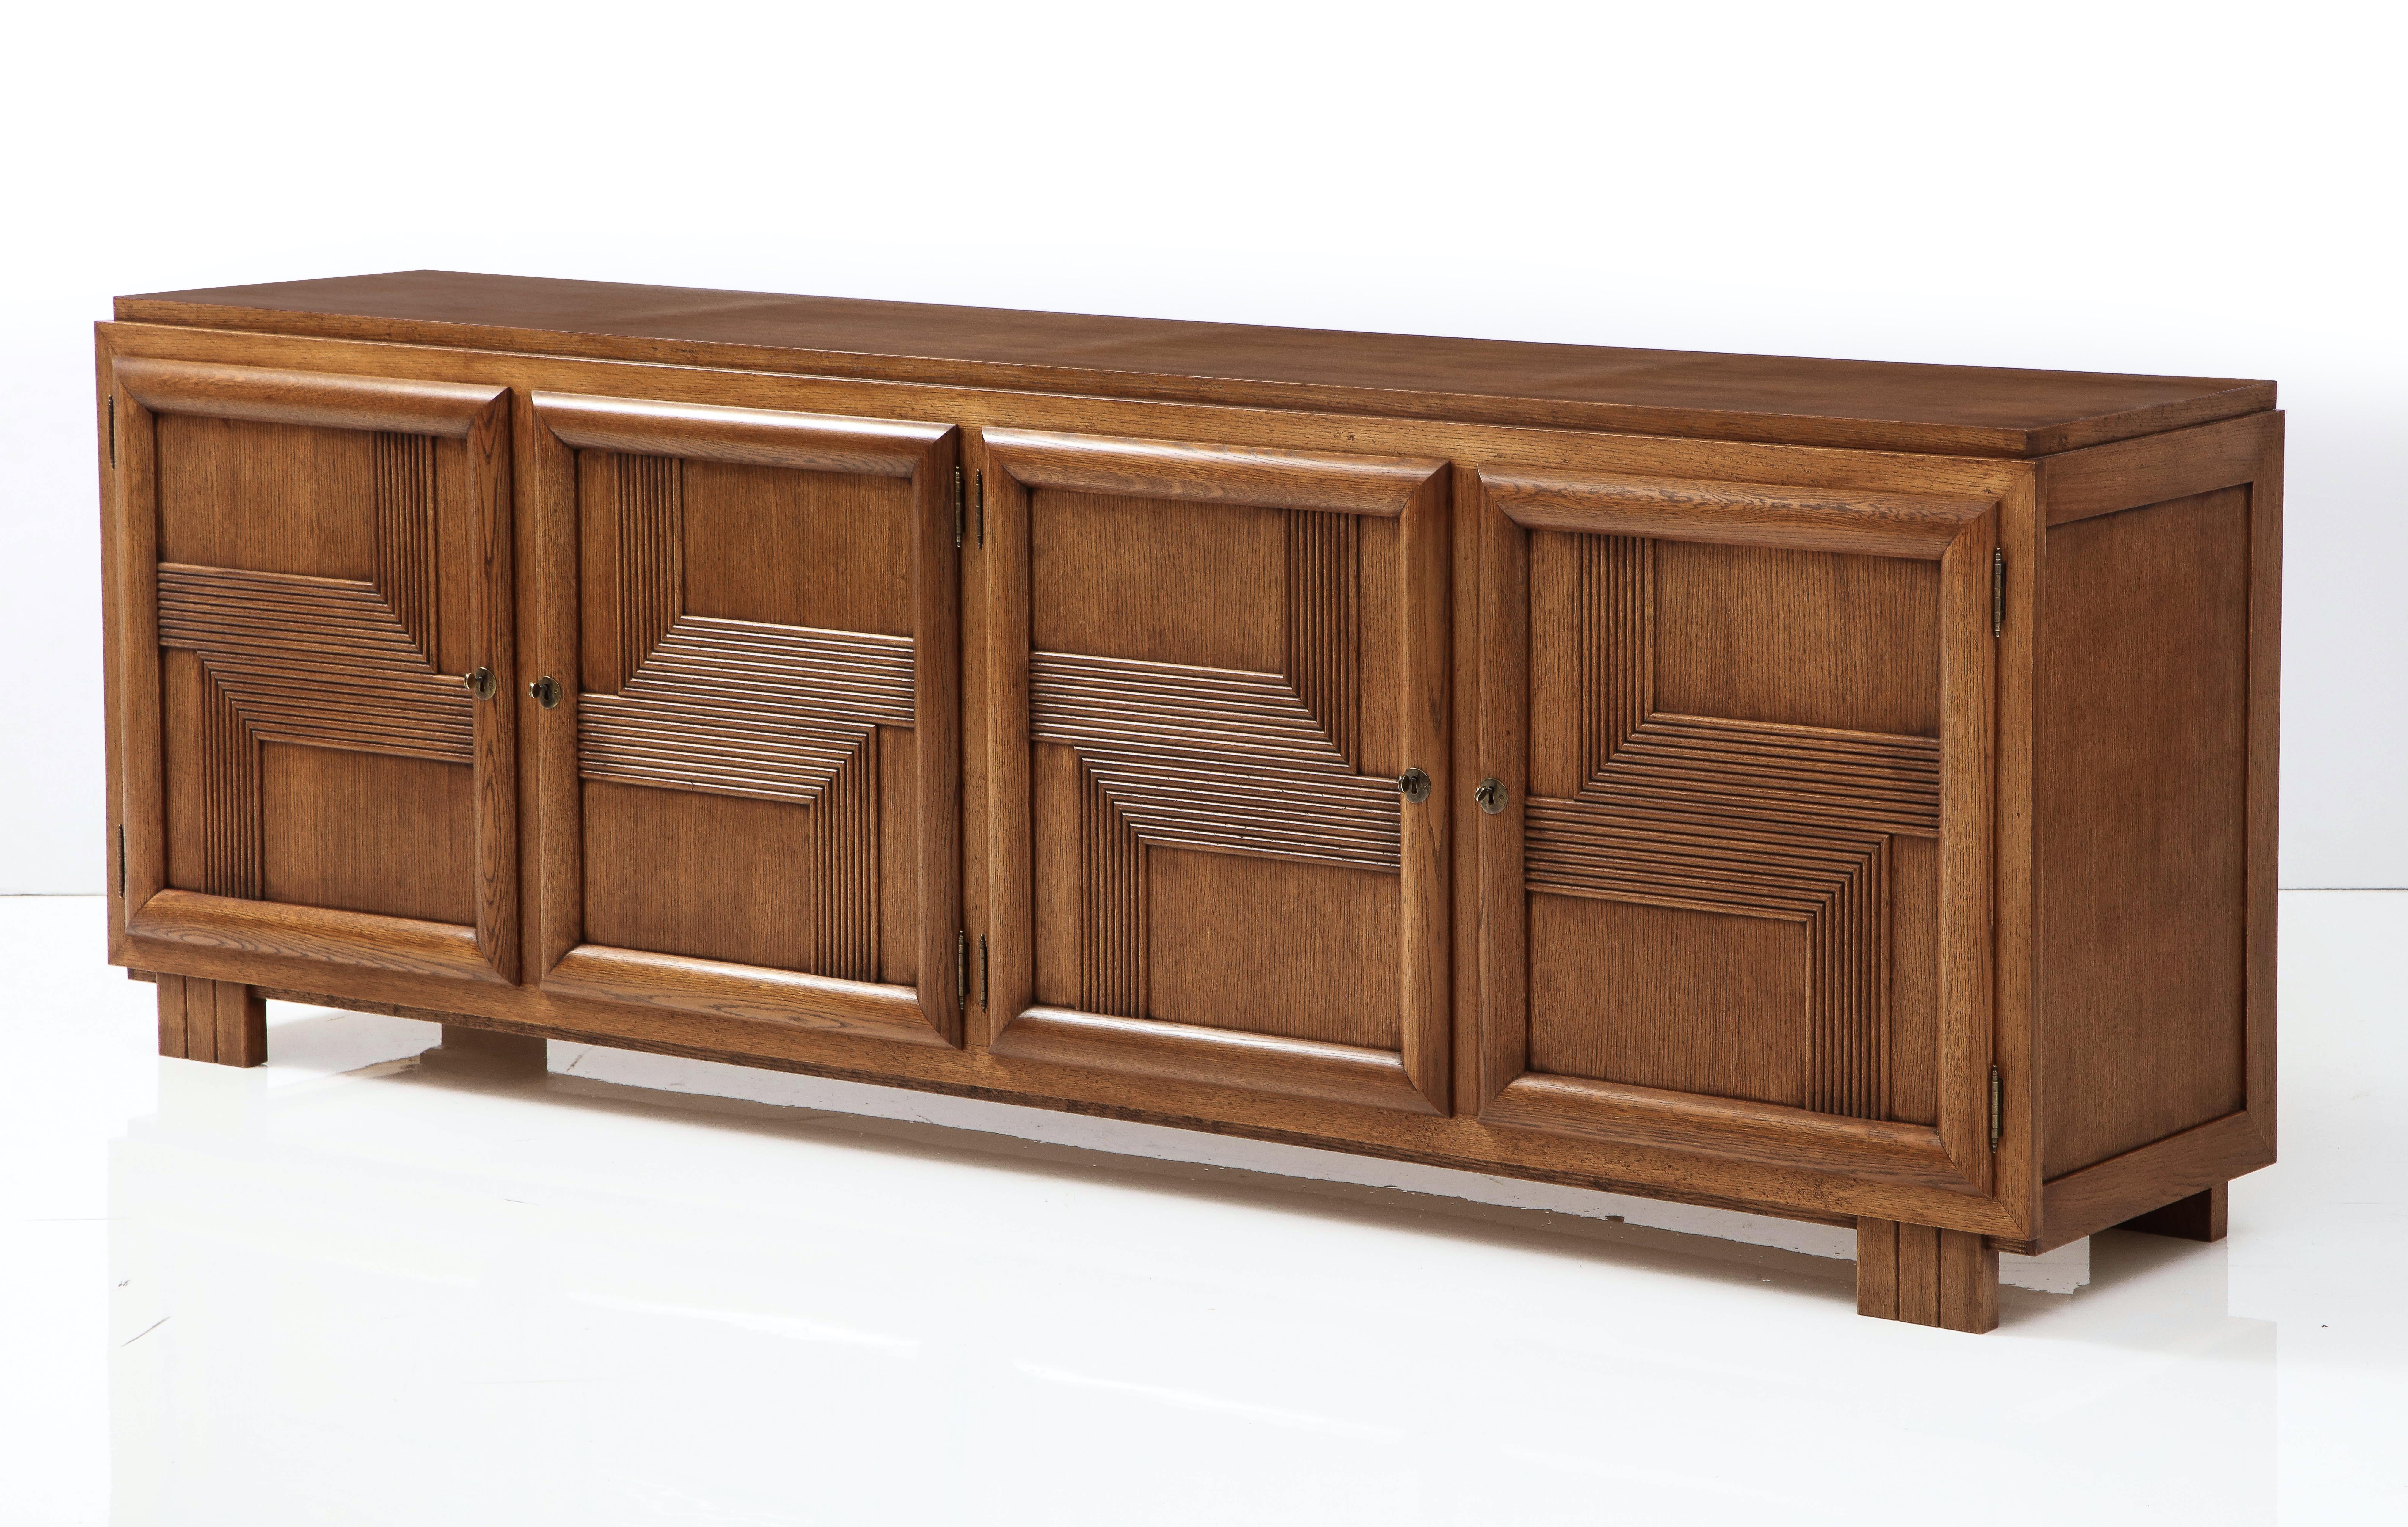 Hand-Crafted 'Fredrik' Made to Order Solid Oak Handcrafted Sideboard For Sale